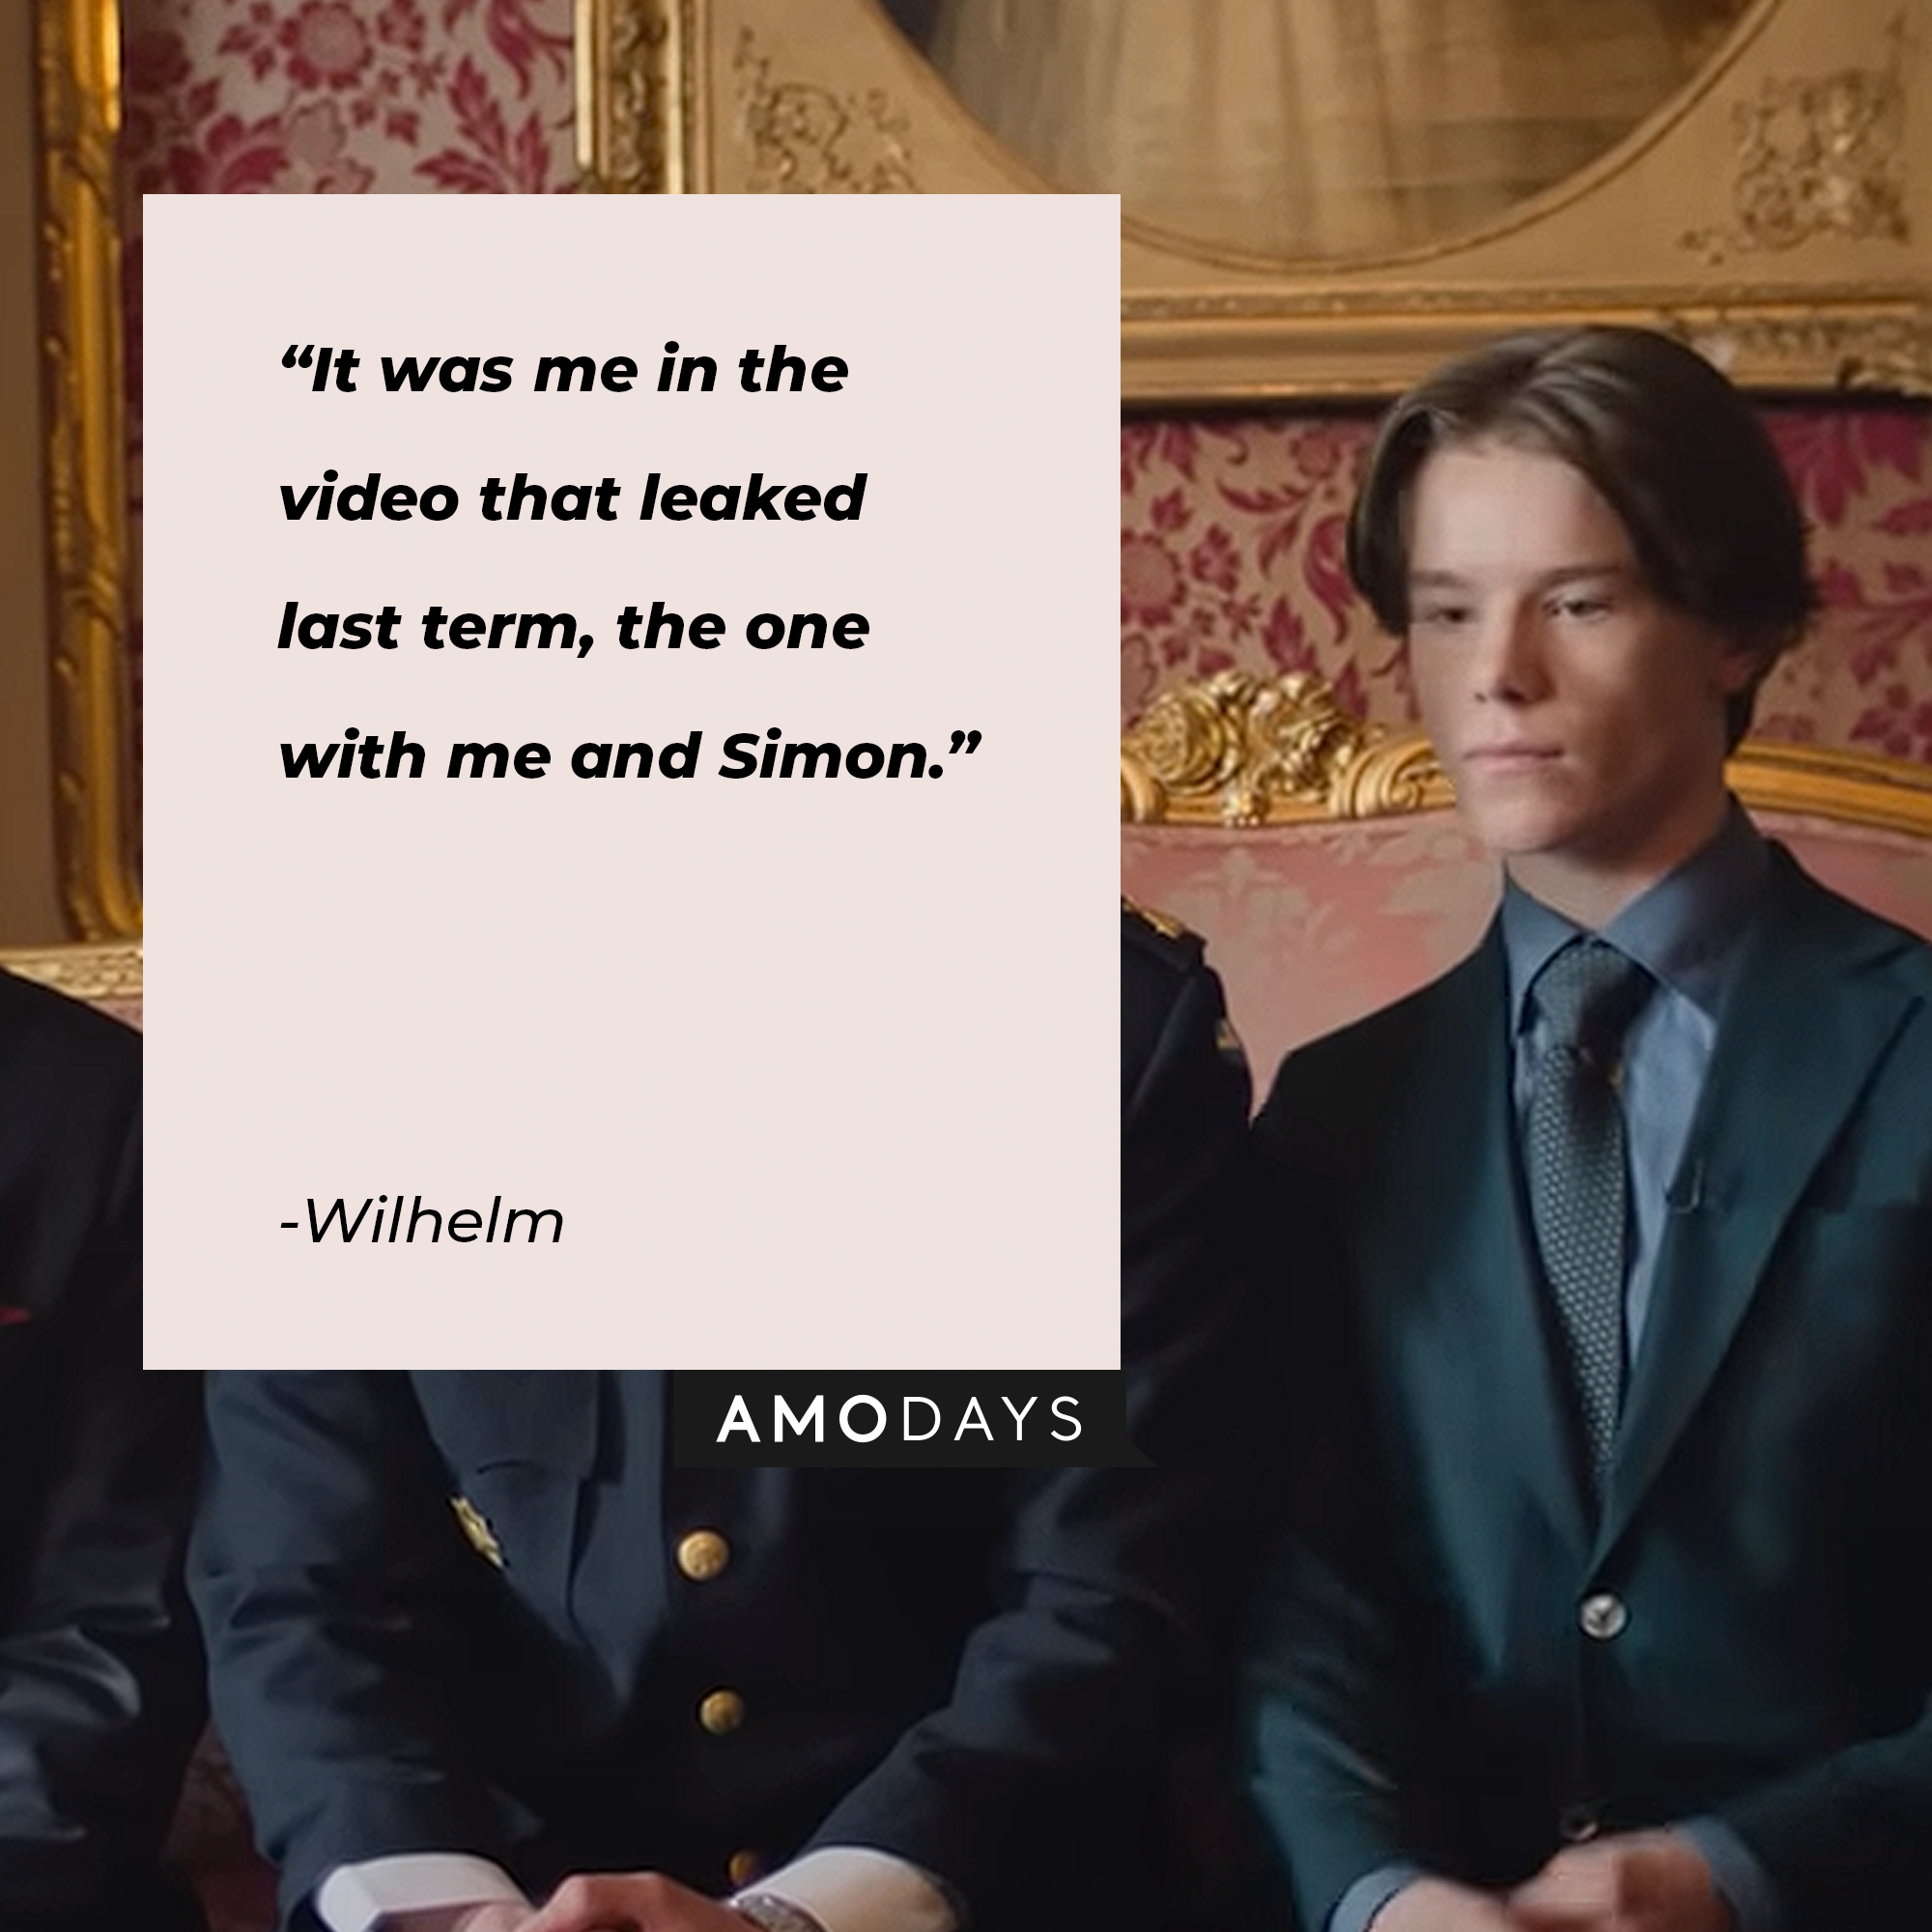 Wilhelm’s quote: "It was me in the video that leaked last term, the one with me and Simon."  | Image: Youtube.com/Netflix